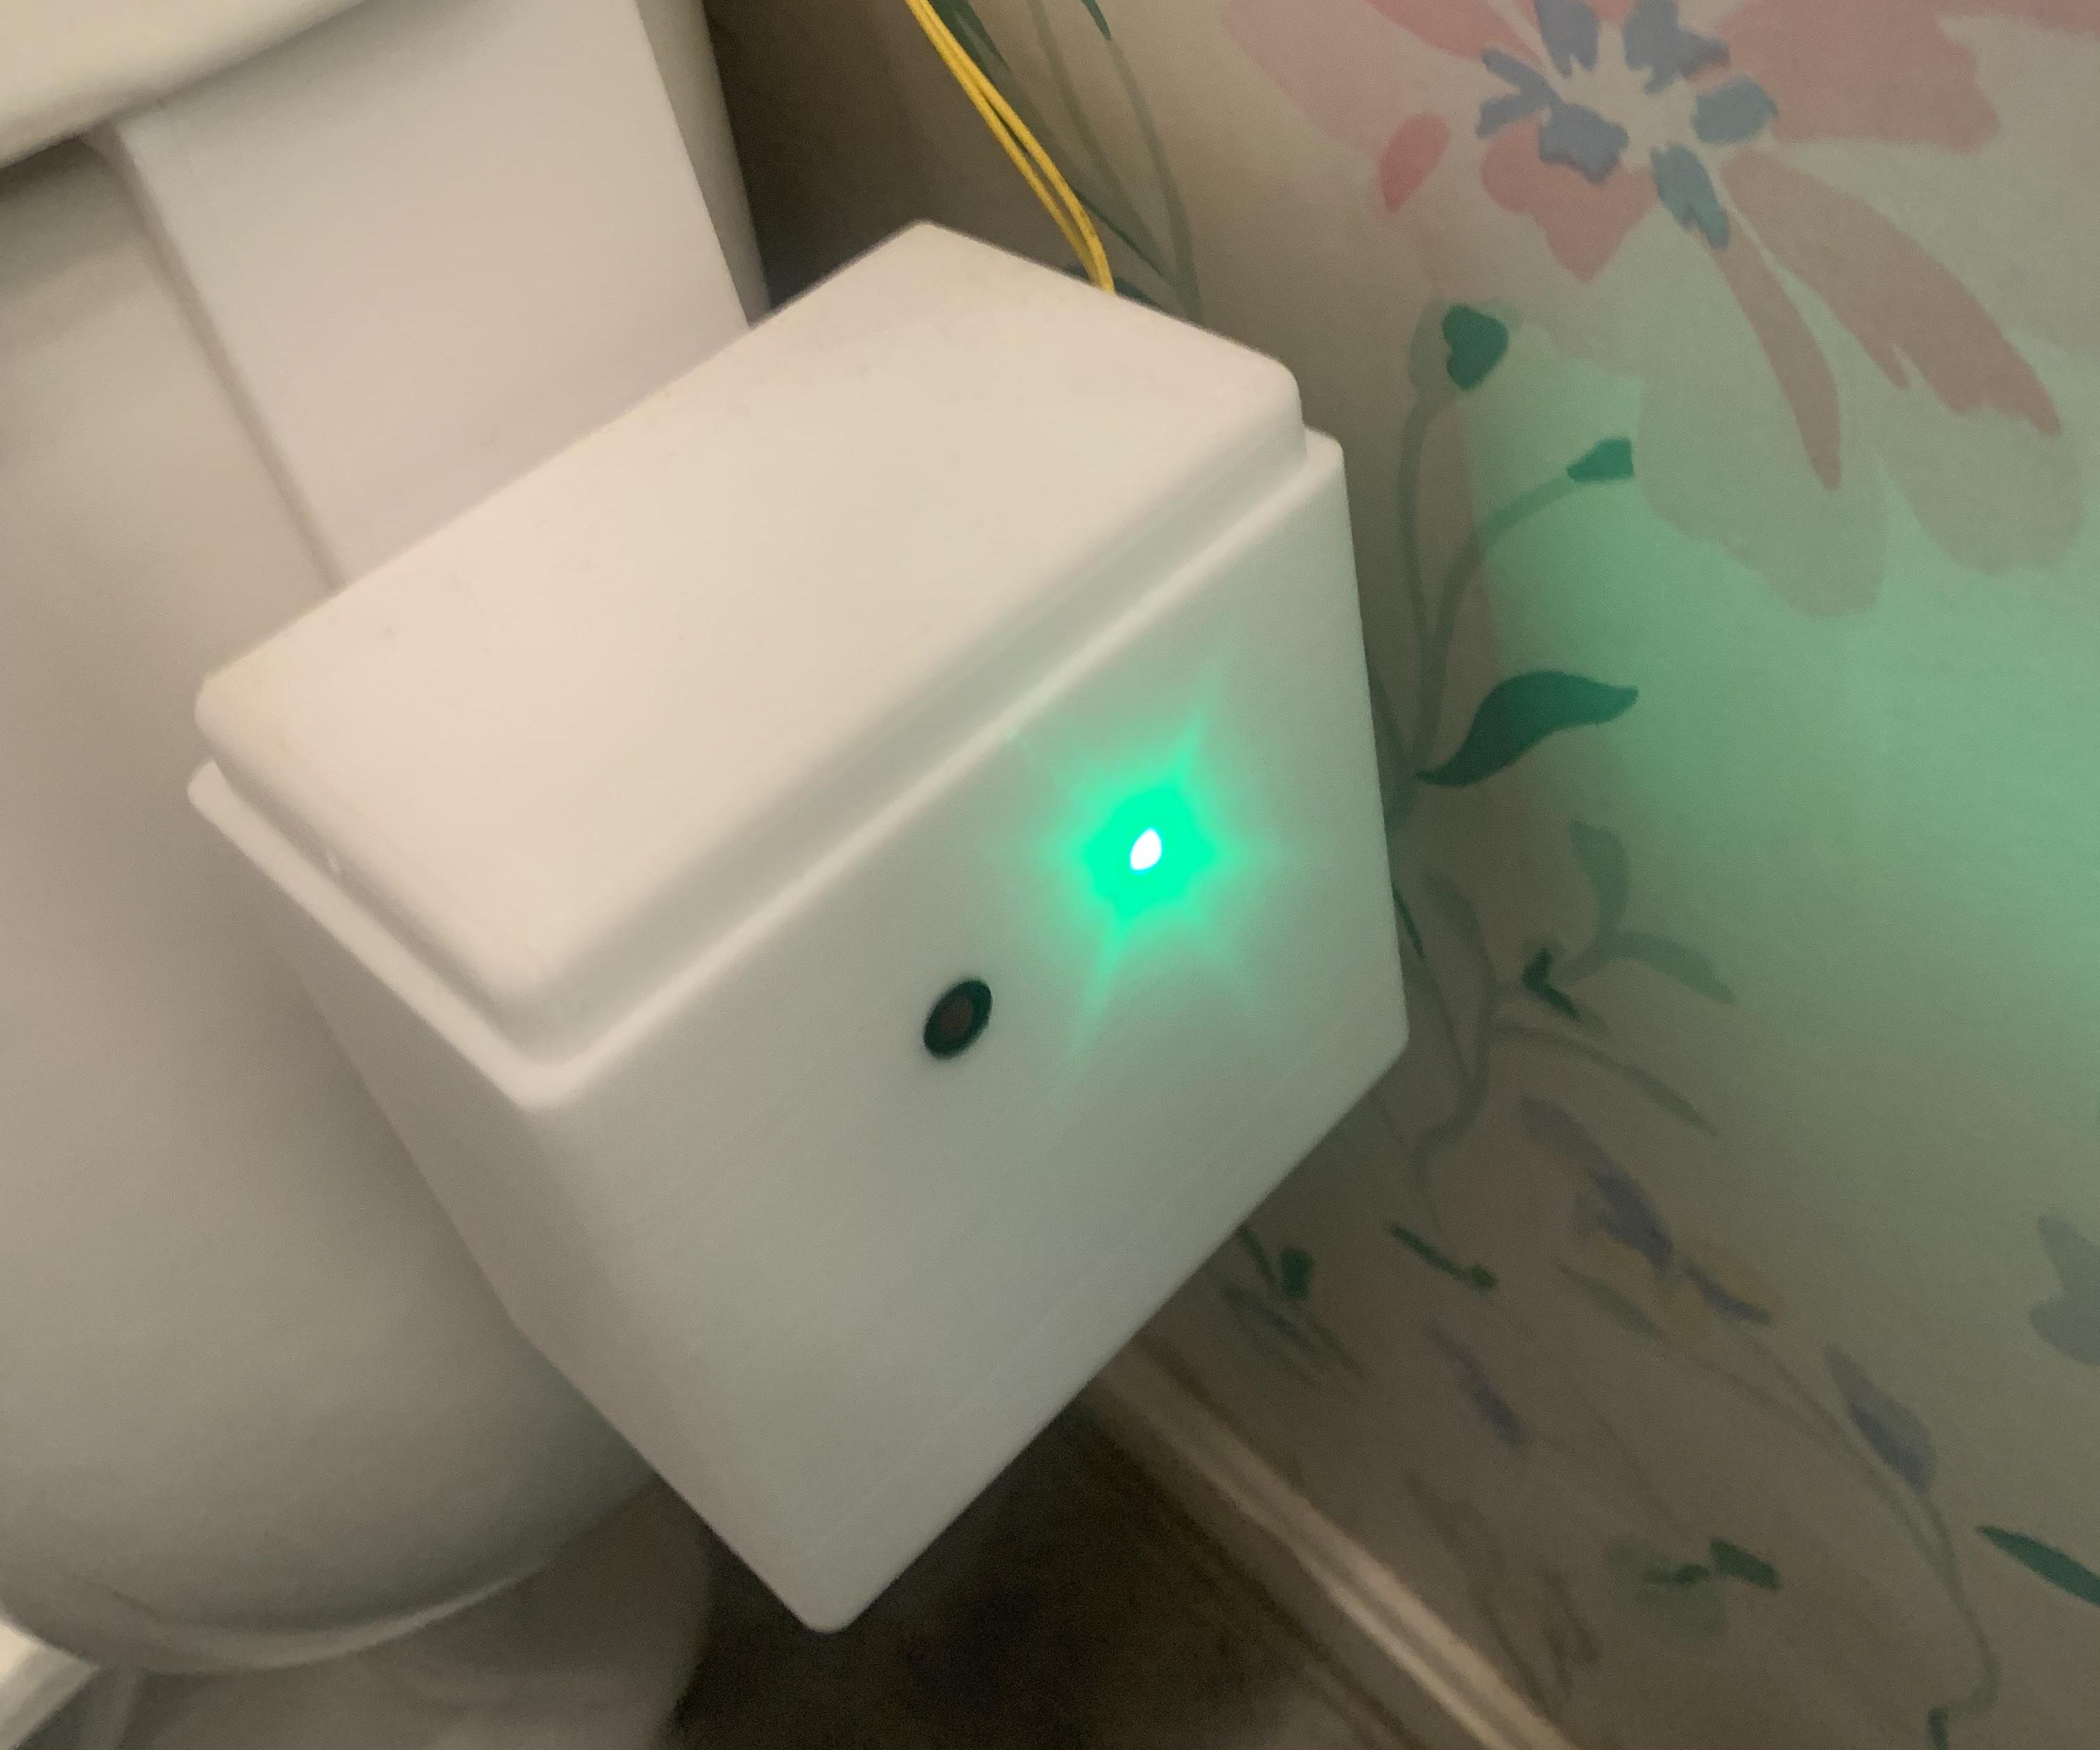 Toilet Water Running Alarm (or How to Avoid a $15,000 Water Bill)